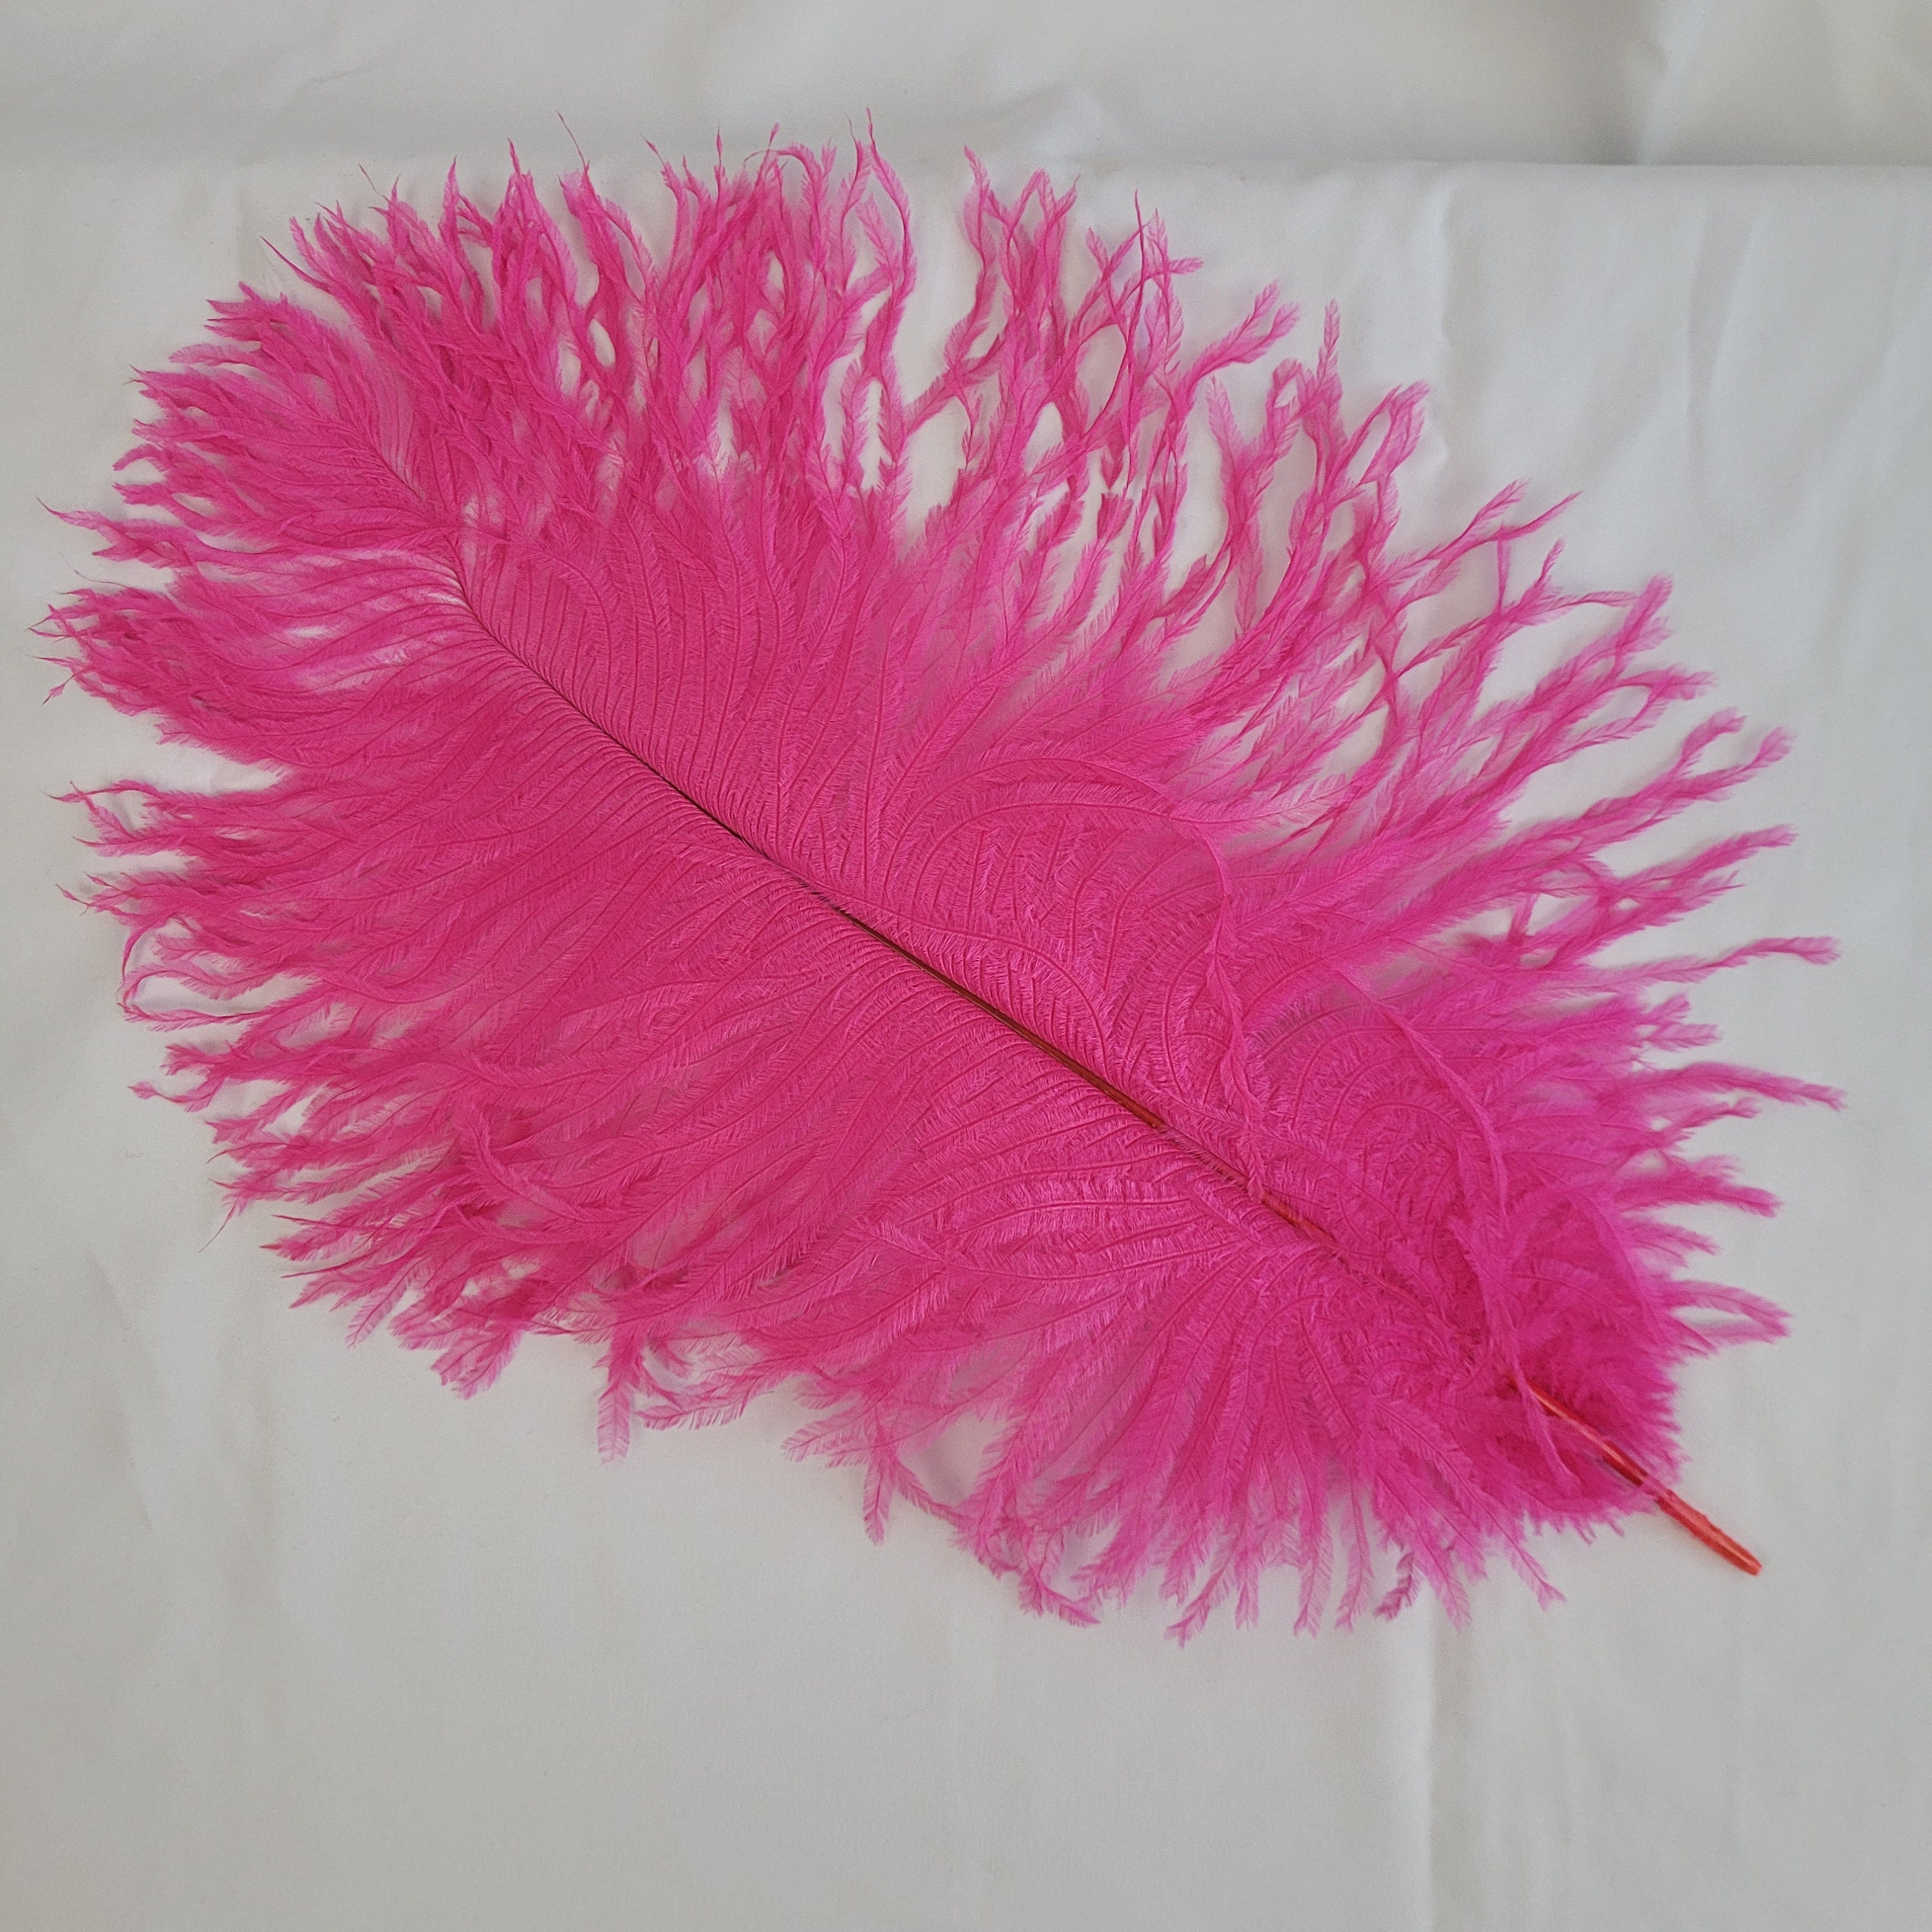  10/100pcs 30-35cm Ostrich Feathers,Fluffy Pink Ostrich Plume  Feathers For Vase Decoration Wedding Party Supplies Natural Ostrich Plume  Crafts Ostrich Feathers ( Color : Leather pink , Size : 10PCS ) 